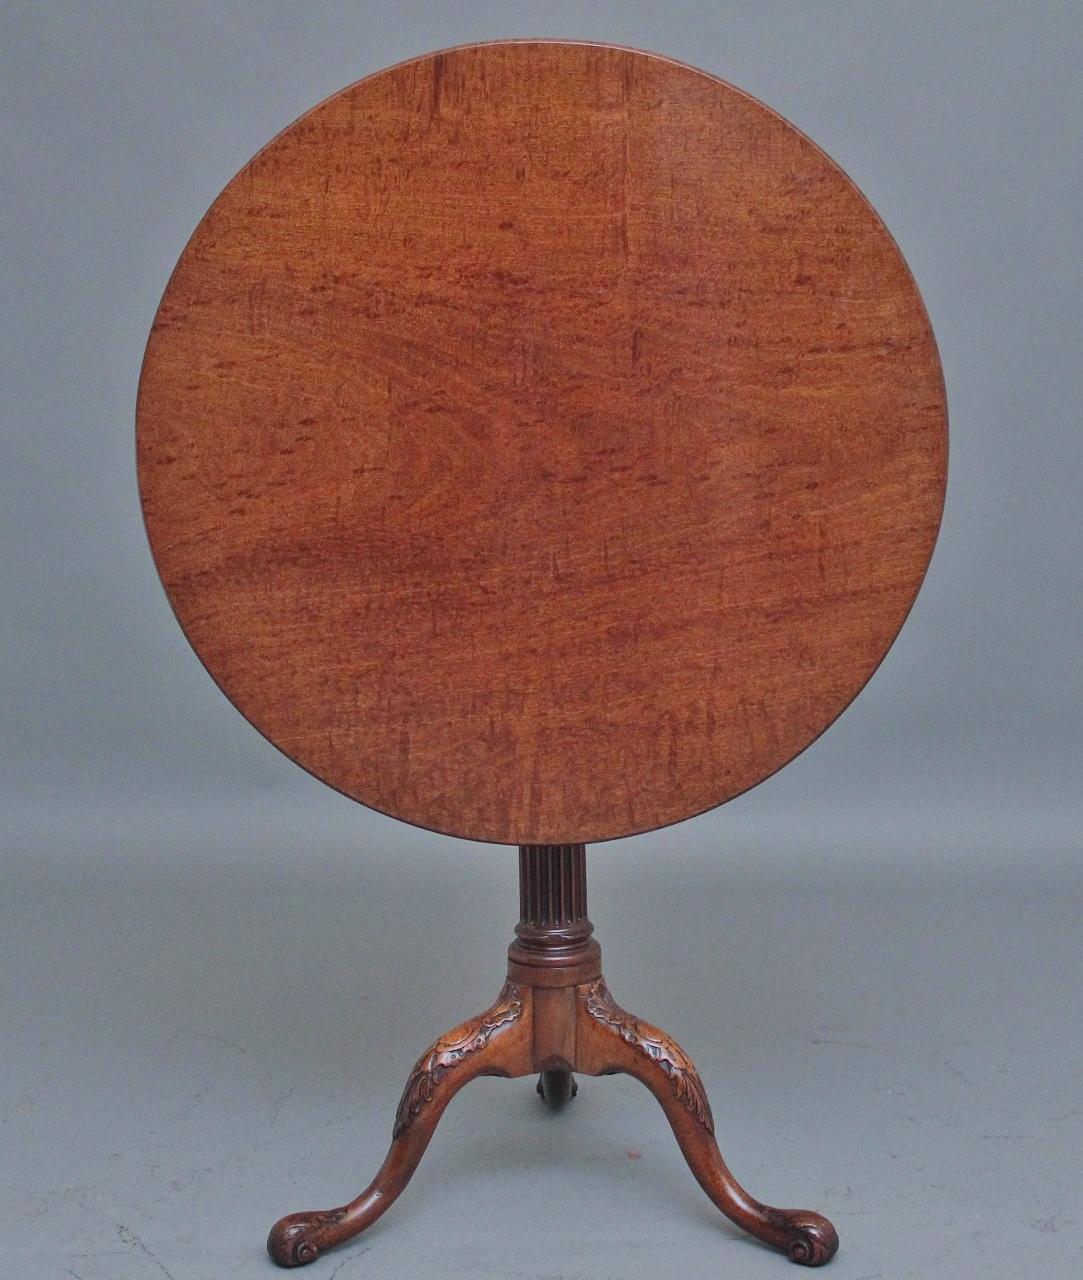 18th Century carved mahogany tripod / wine table, having a lovely figured circular mahogany top supported on a turned and fluted column terminating with three slender shaped legs with decorative carving.  Circa 1780.
